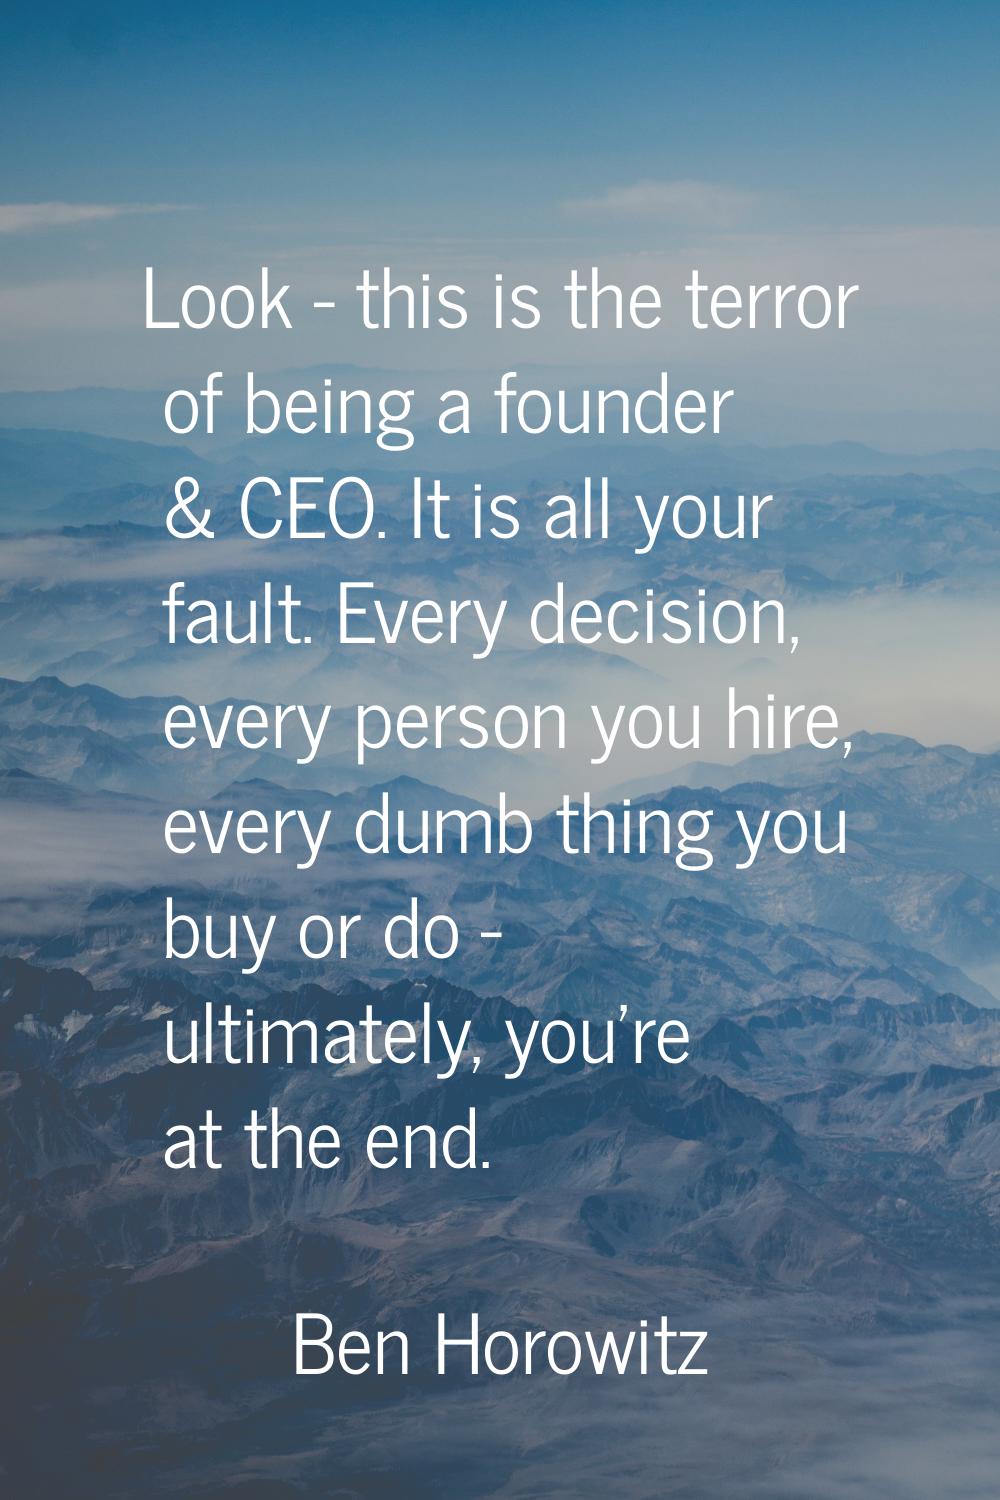 Look - this is the terror of being a founder & CEO. It is all your fault. Every decision, every per